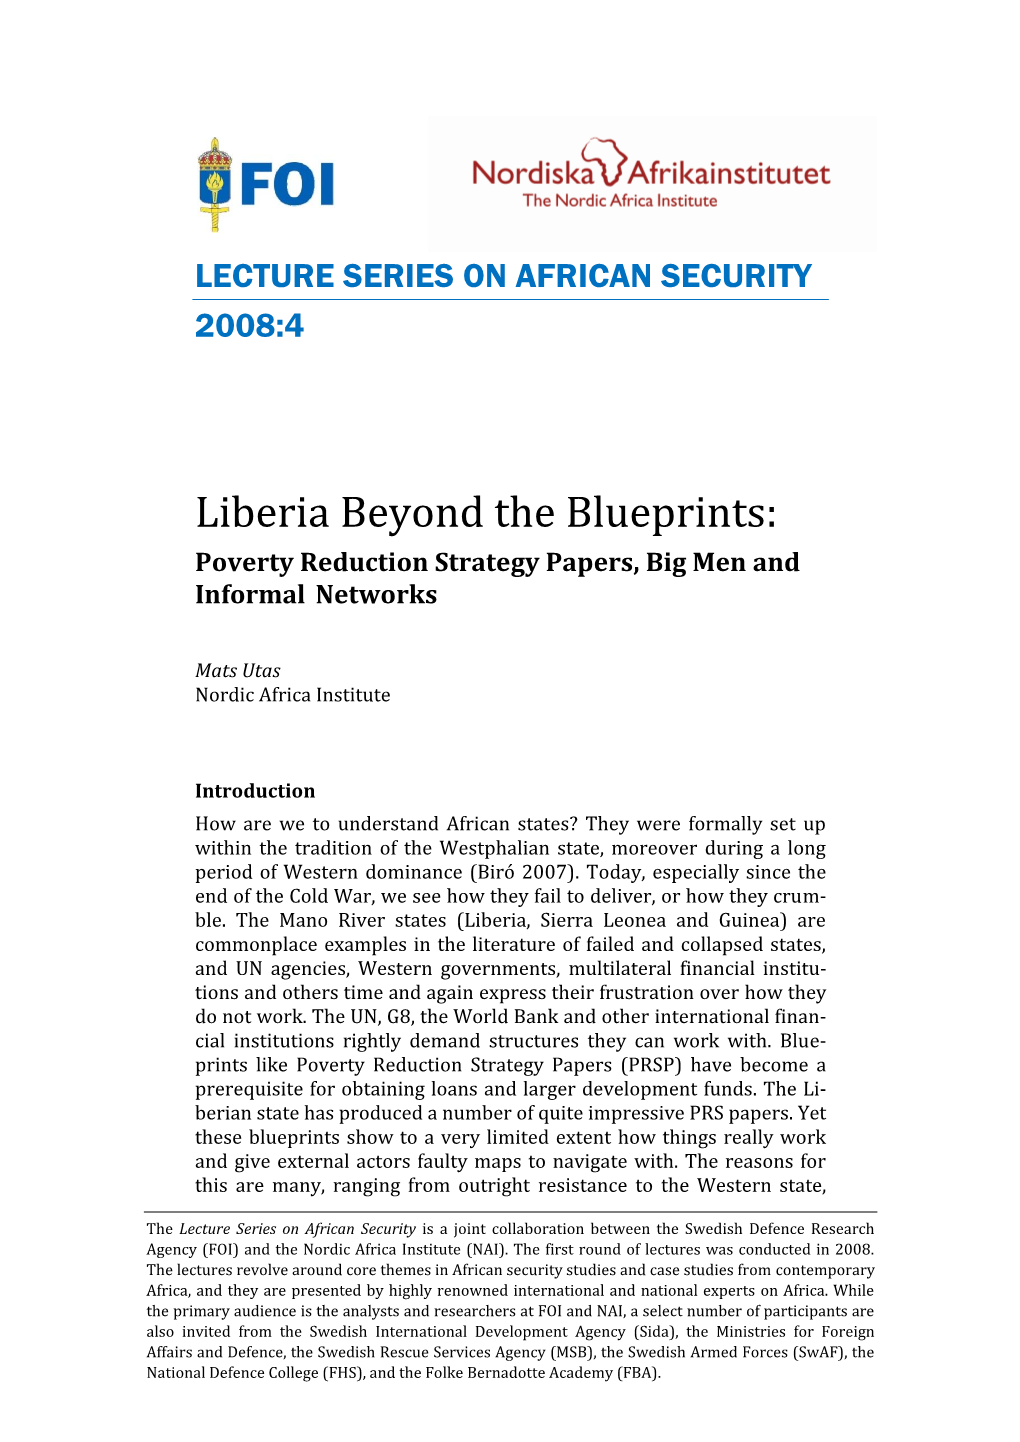 Liberia Beyond the Blueprints: Poverty Reduction Strategy Papers, Big Men and Informal Networks